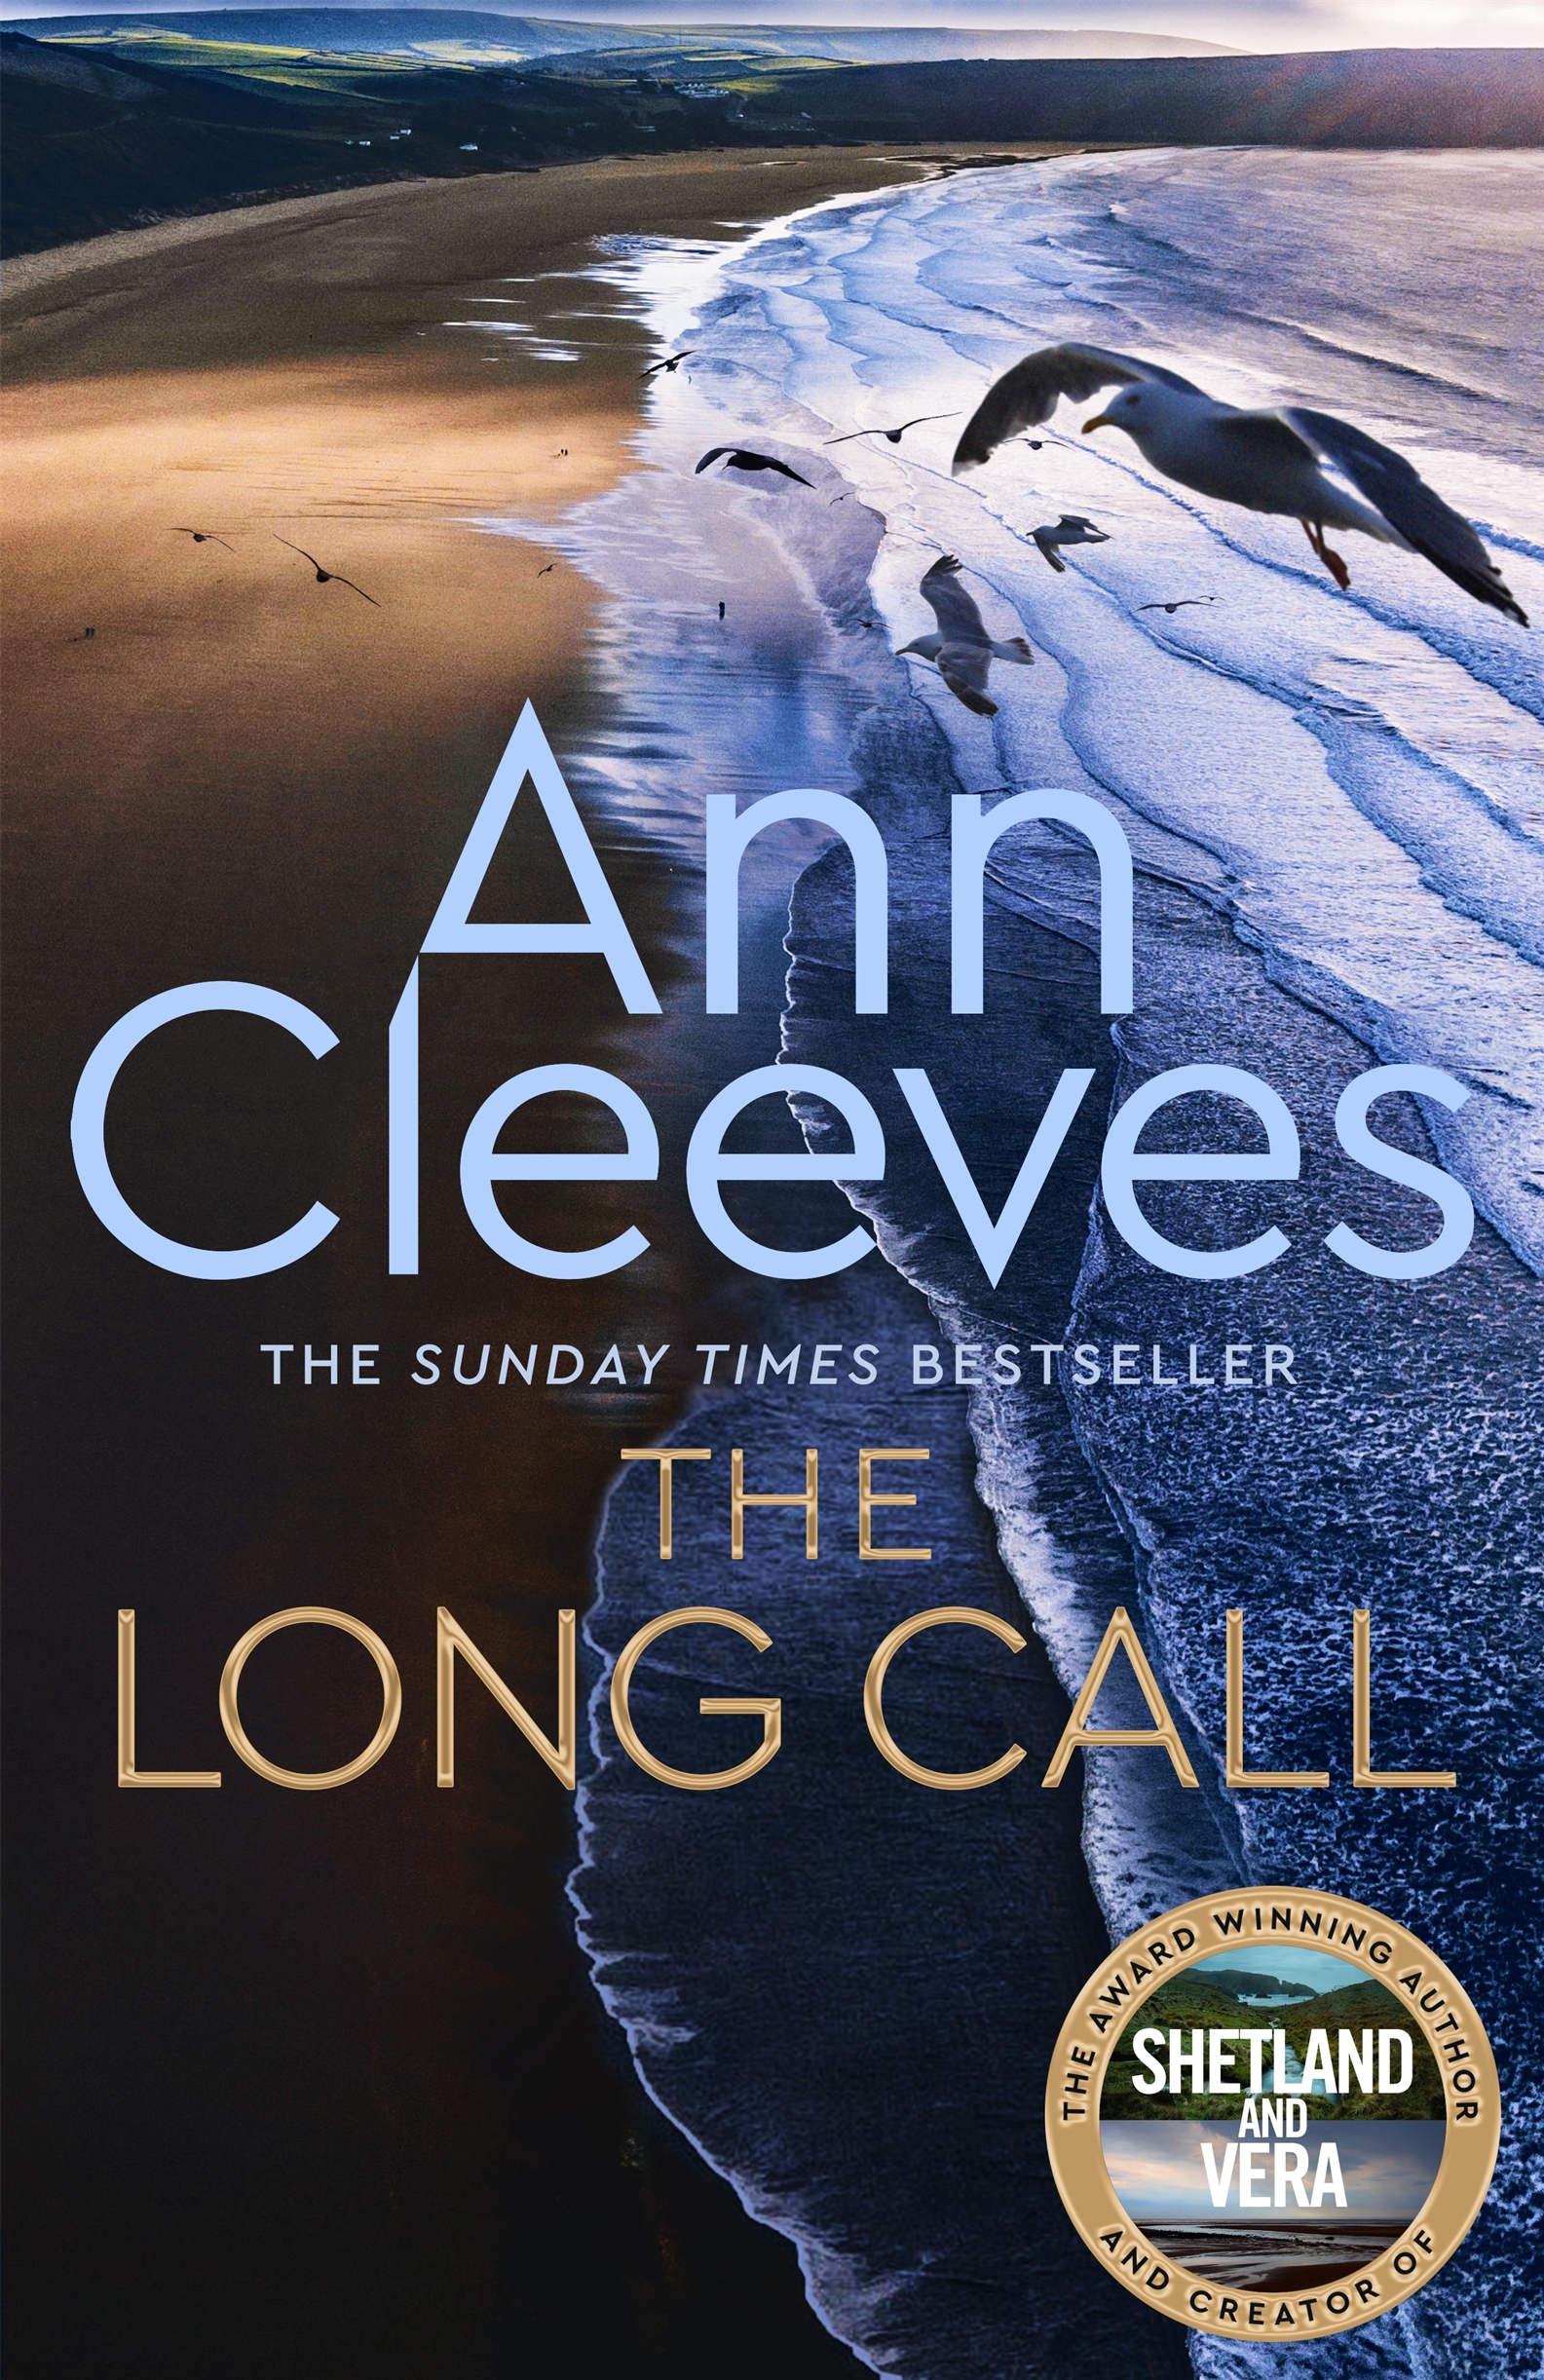 Ann Cleeves on "The Long Call": 'In my kind of crime fiction the plot almost takes care of itself, I’ve never been very good at plotting'